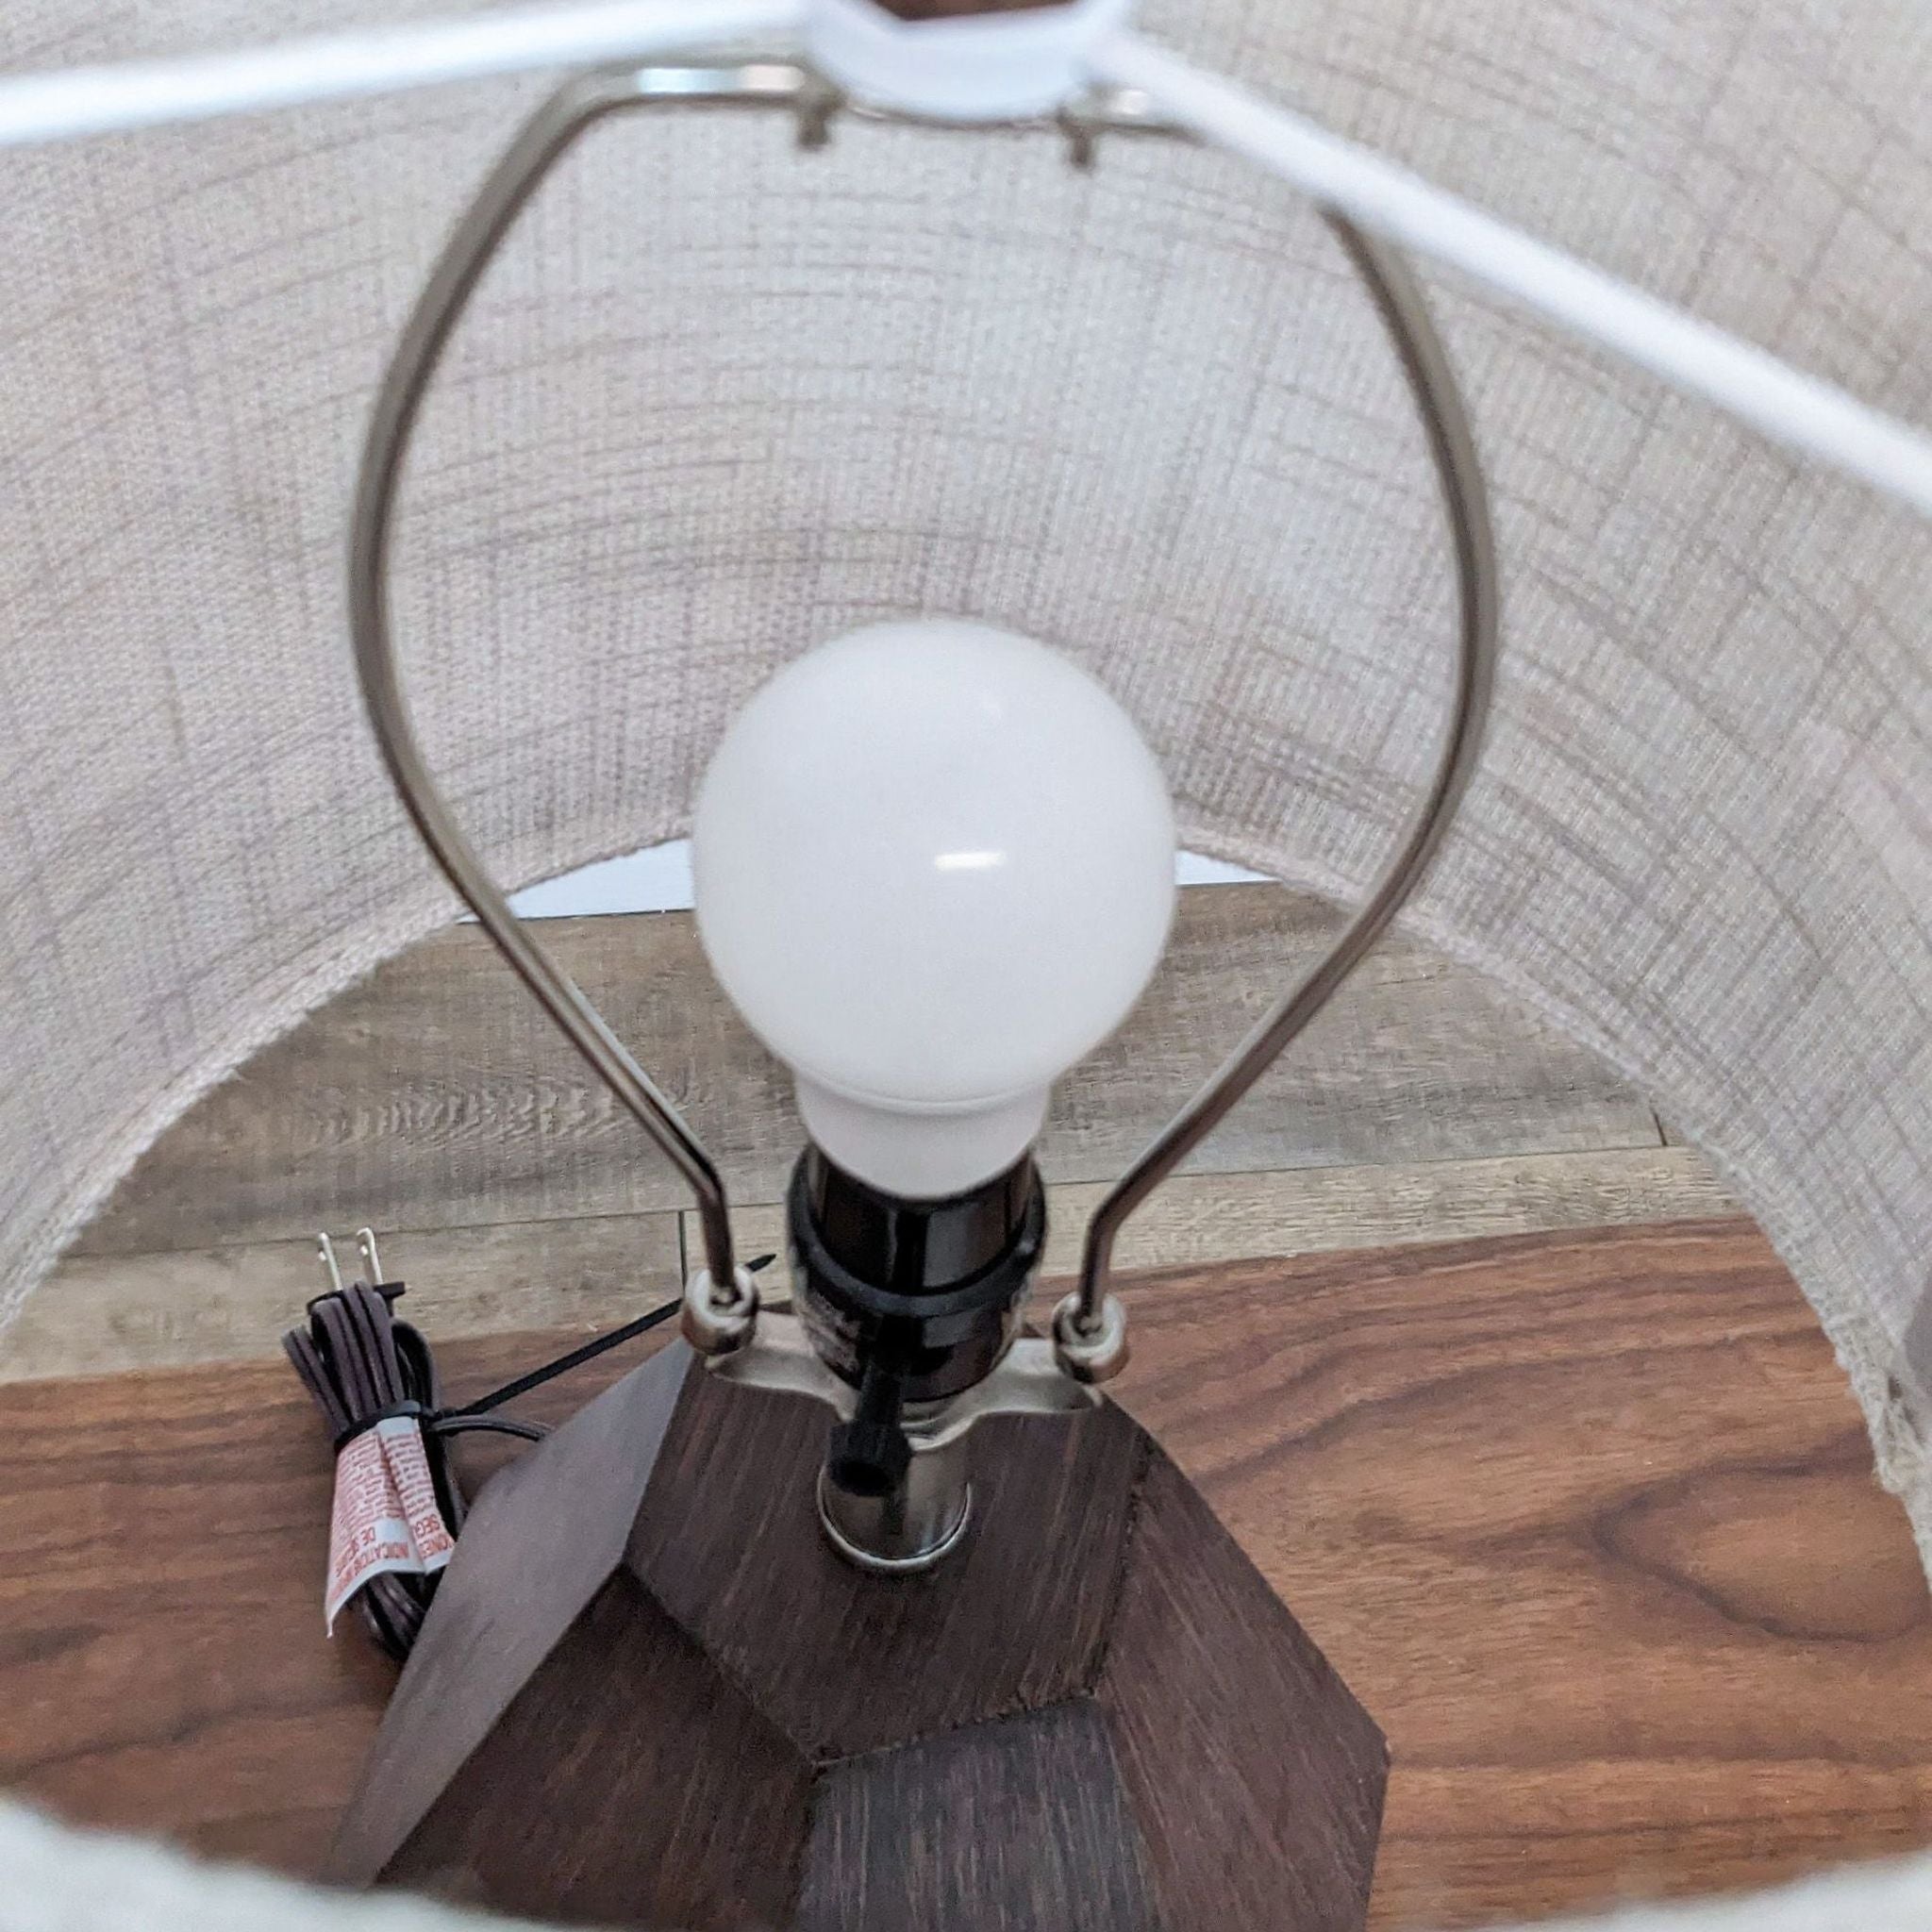 Interior view of a Reperch table lamp, showcasing the bulb and inner shade structure above a wooden base.